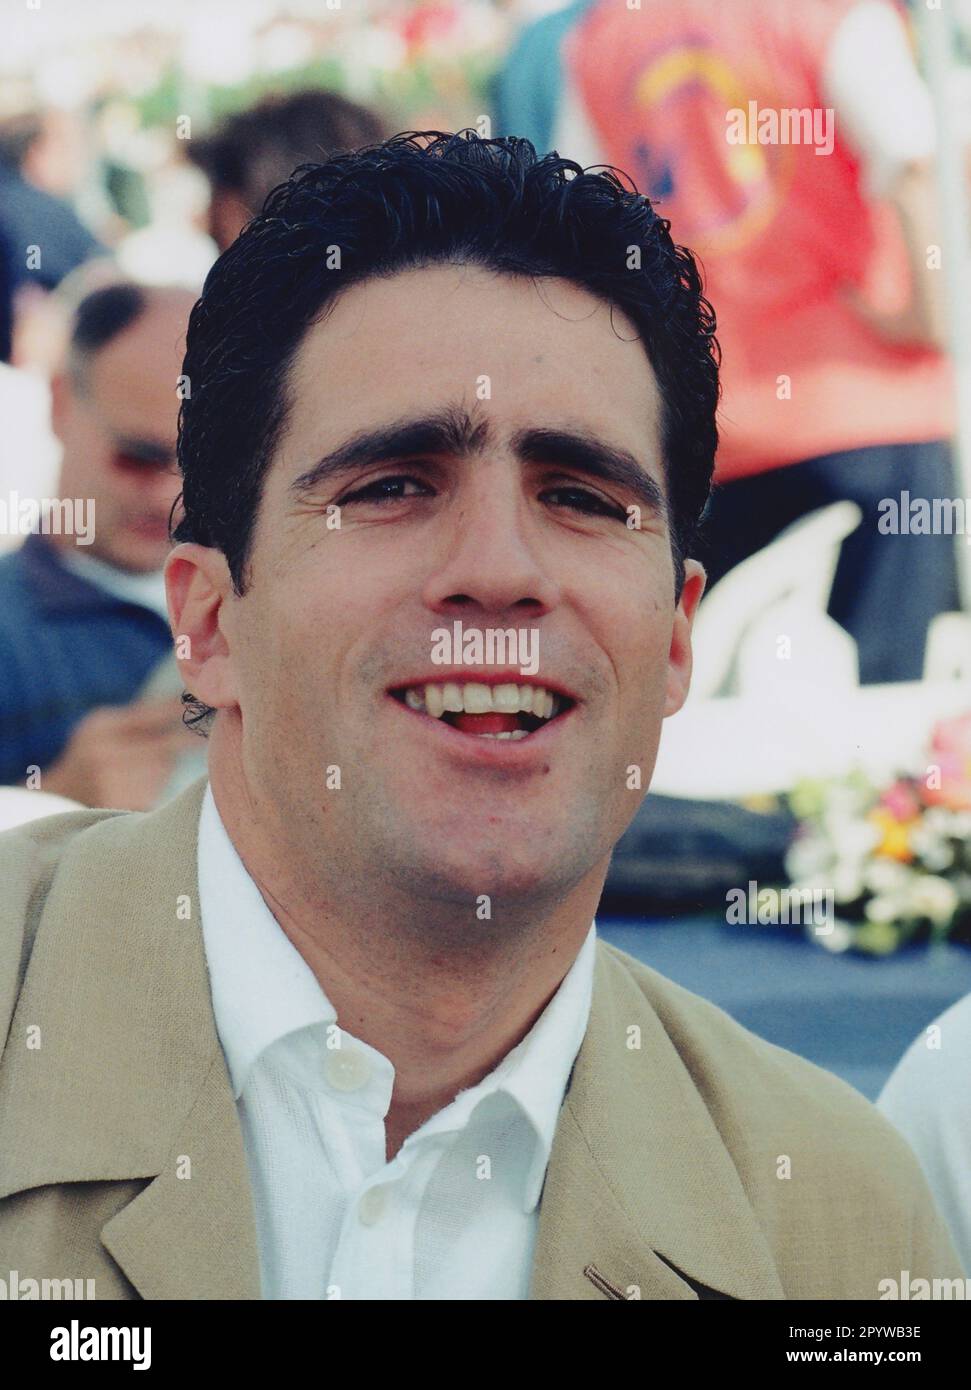 Miguel Indurain, guest of honor at the Tour de France, here in Rouen. [automated translation] Stock Photo